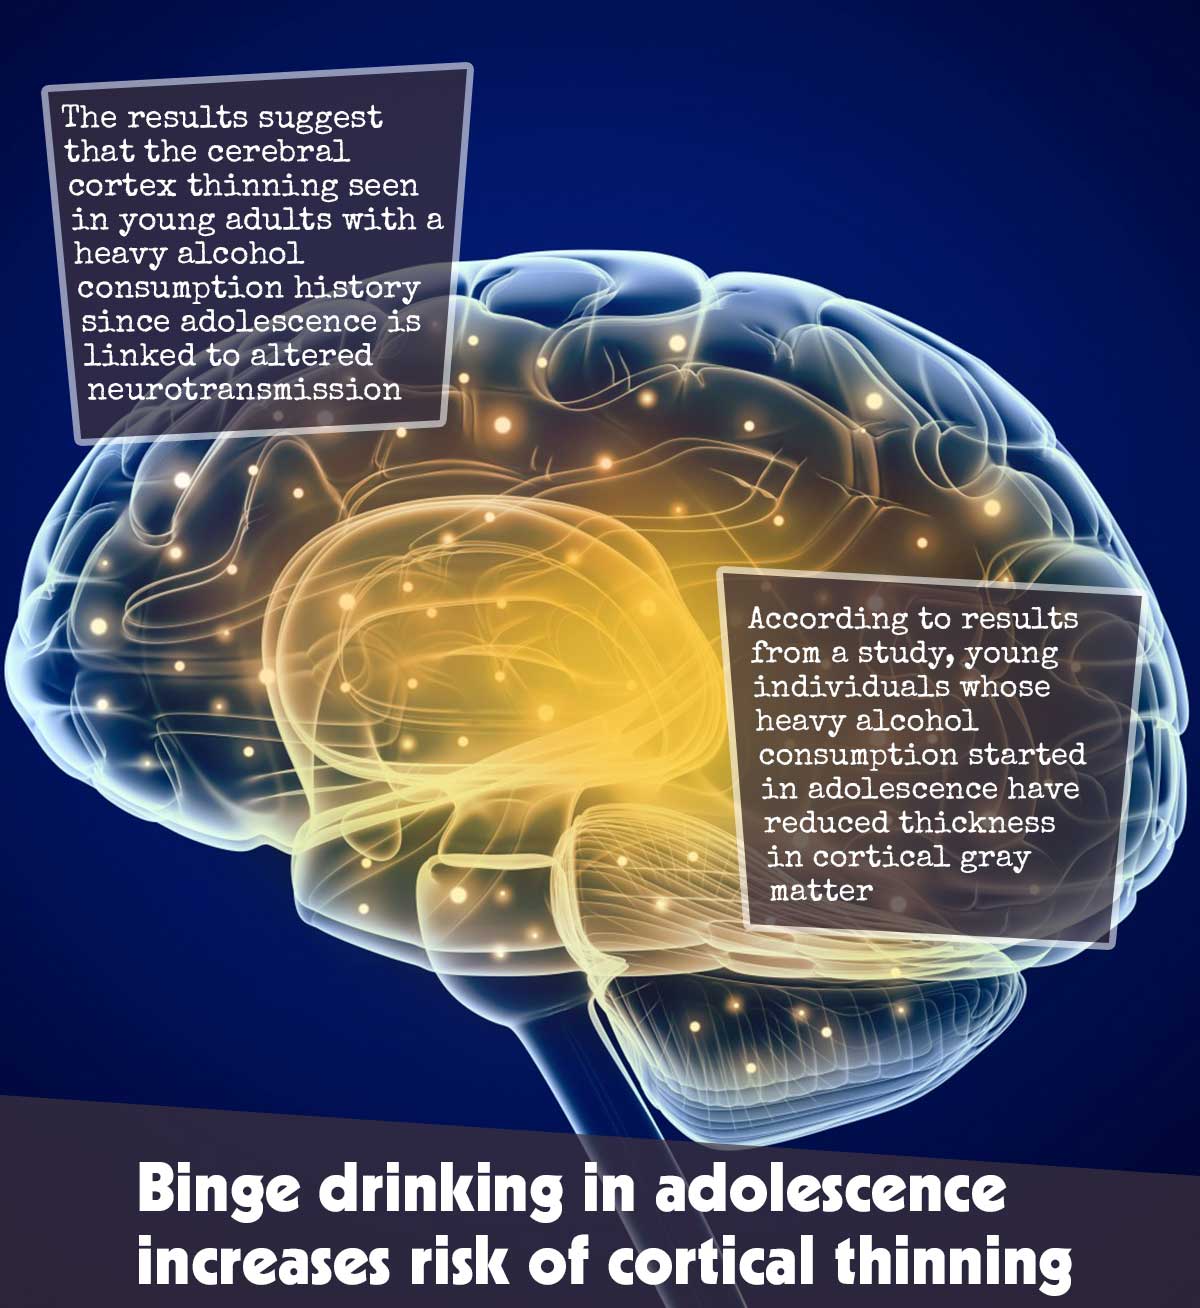 Binge drinking in adolescence increases the risk of cortical thinning